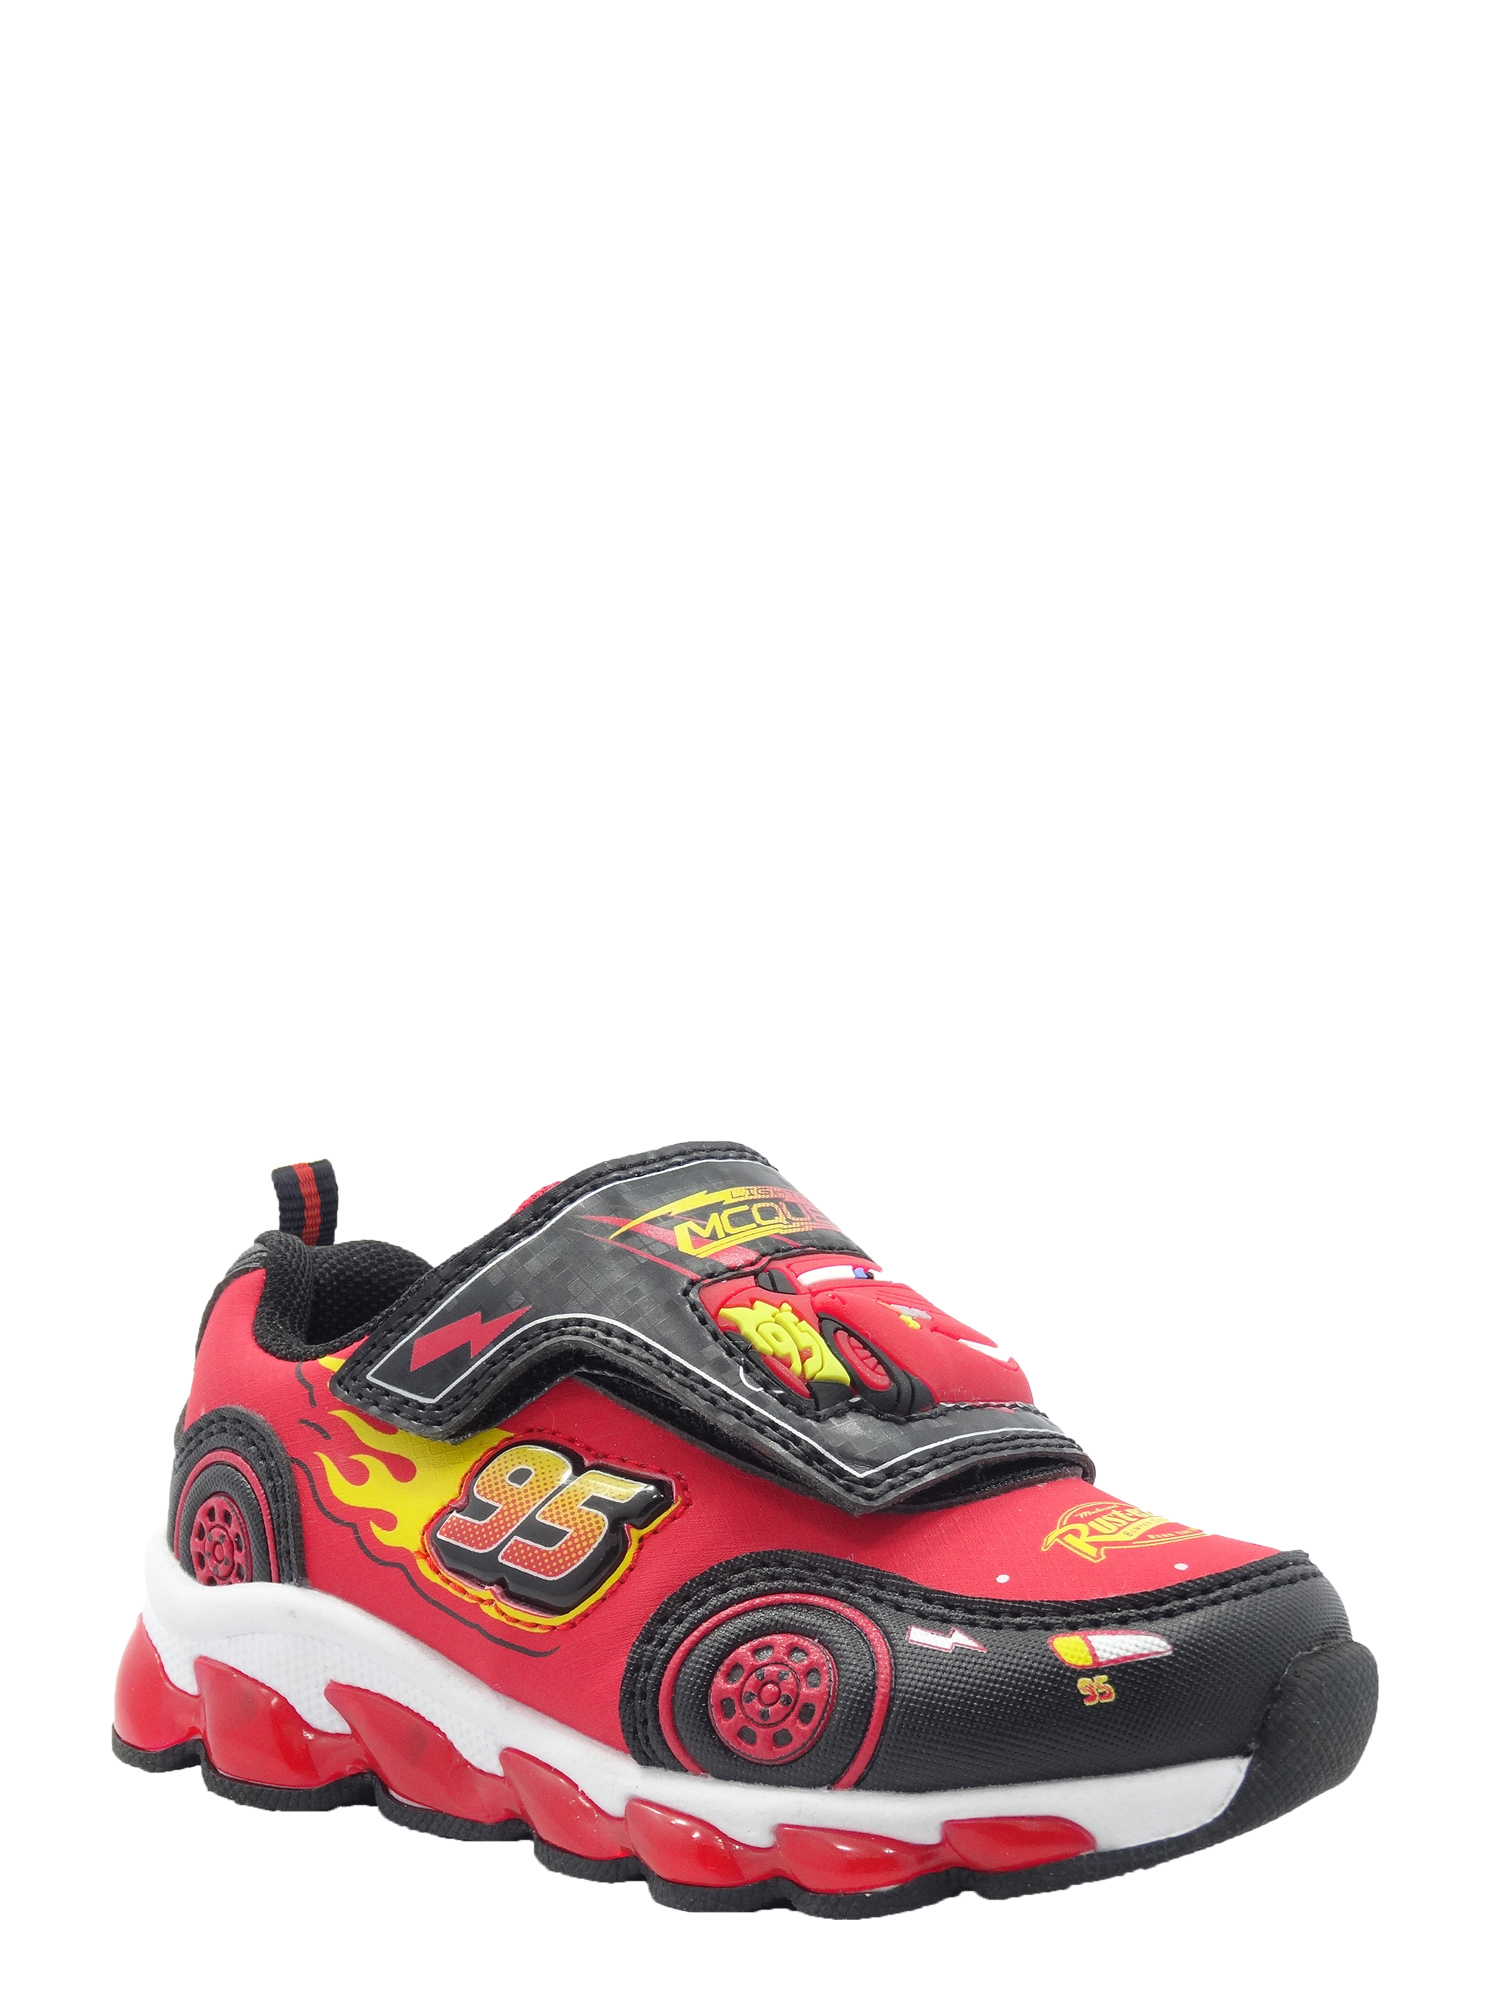 Cars Licensed Boys' Athletic Shoe - image 1 of 5